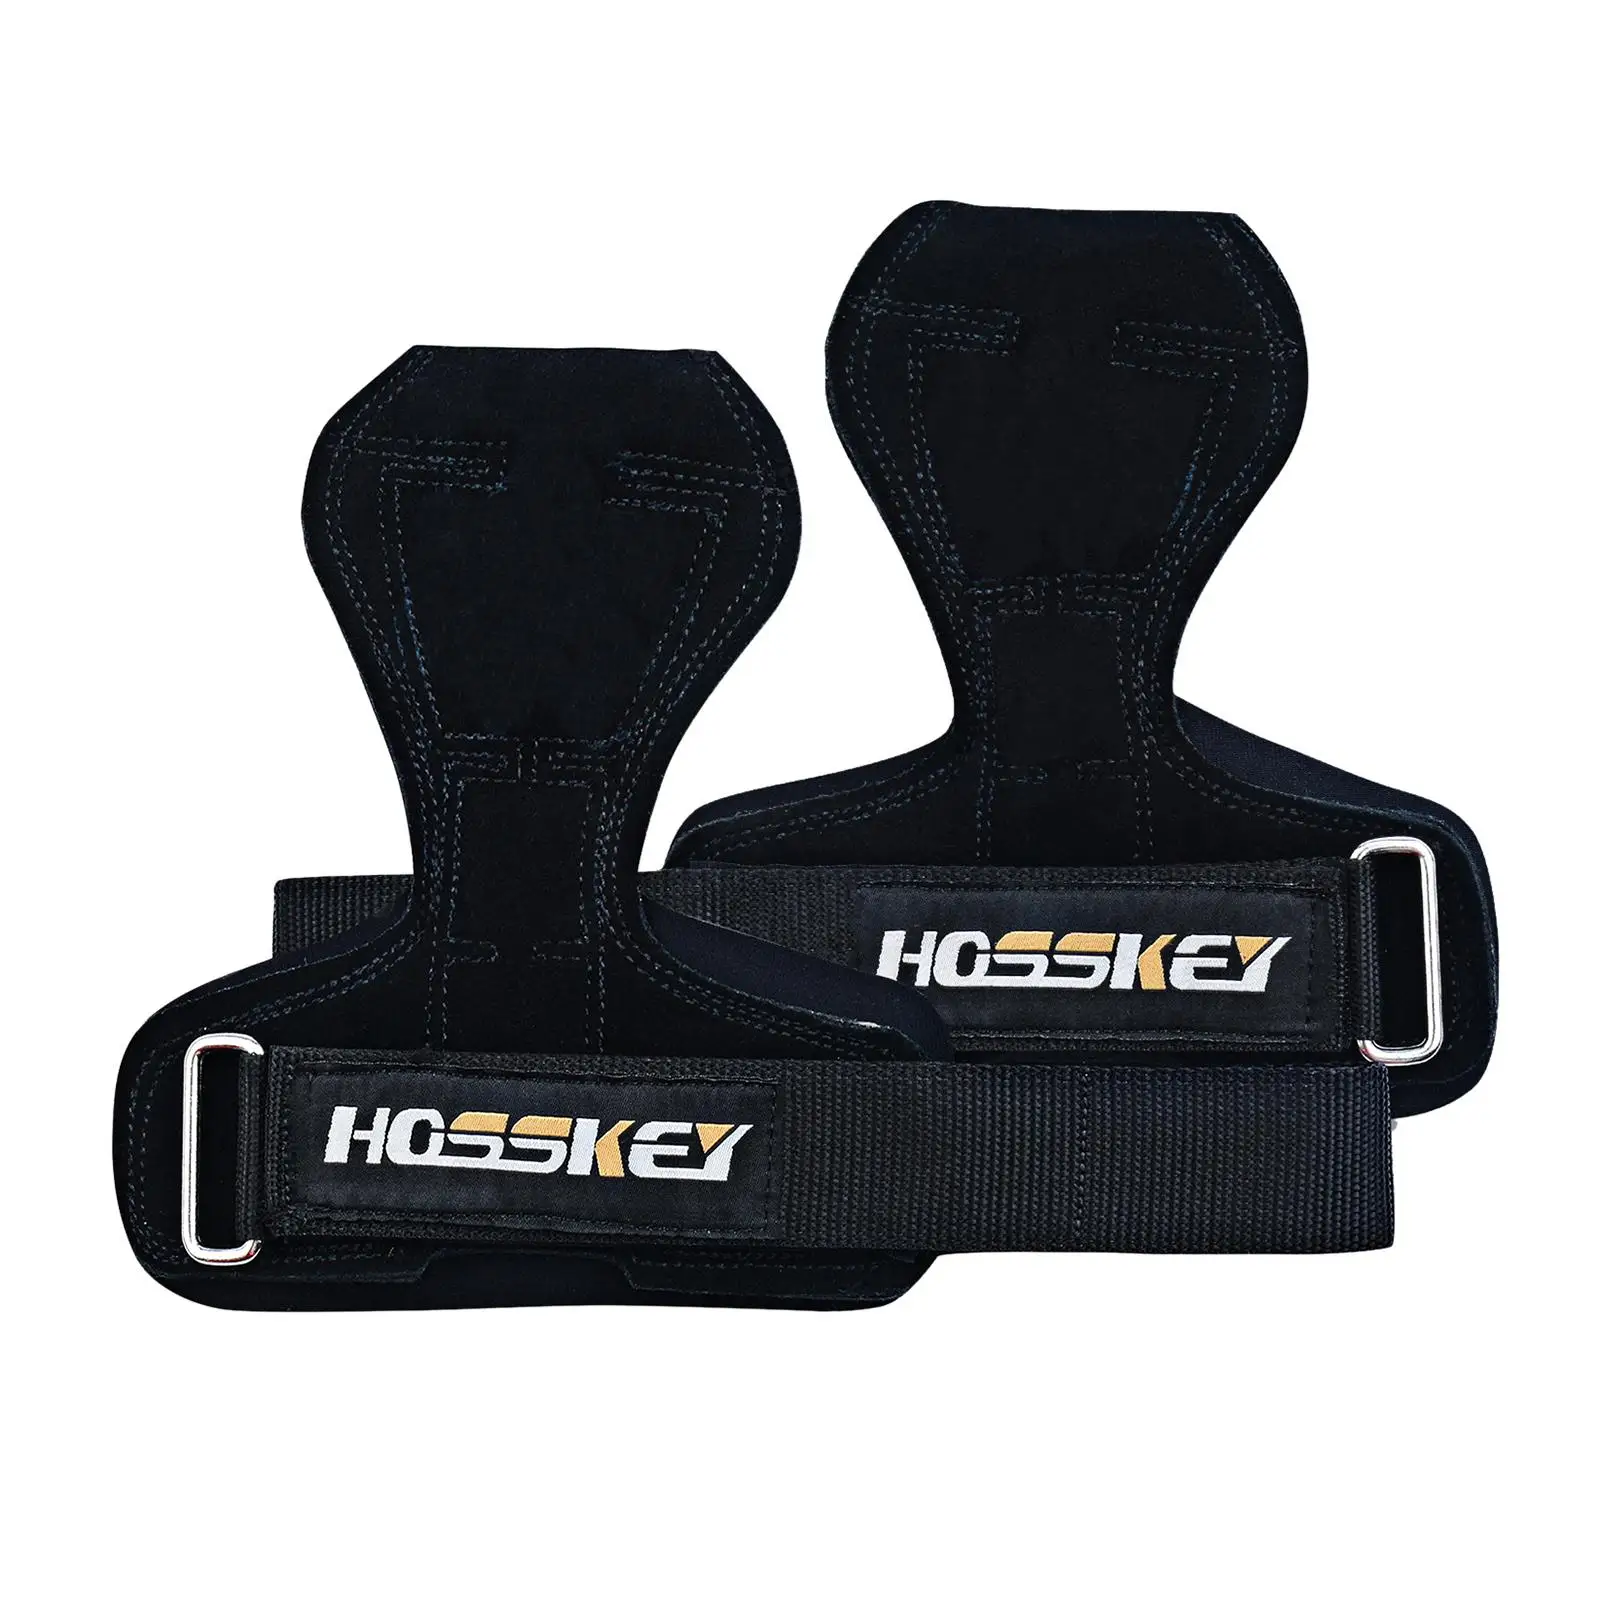 1 Pair Fitness Weight Lifting Hook Gym Fitness Weightlifting Training Grips Straps Wrist Support